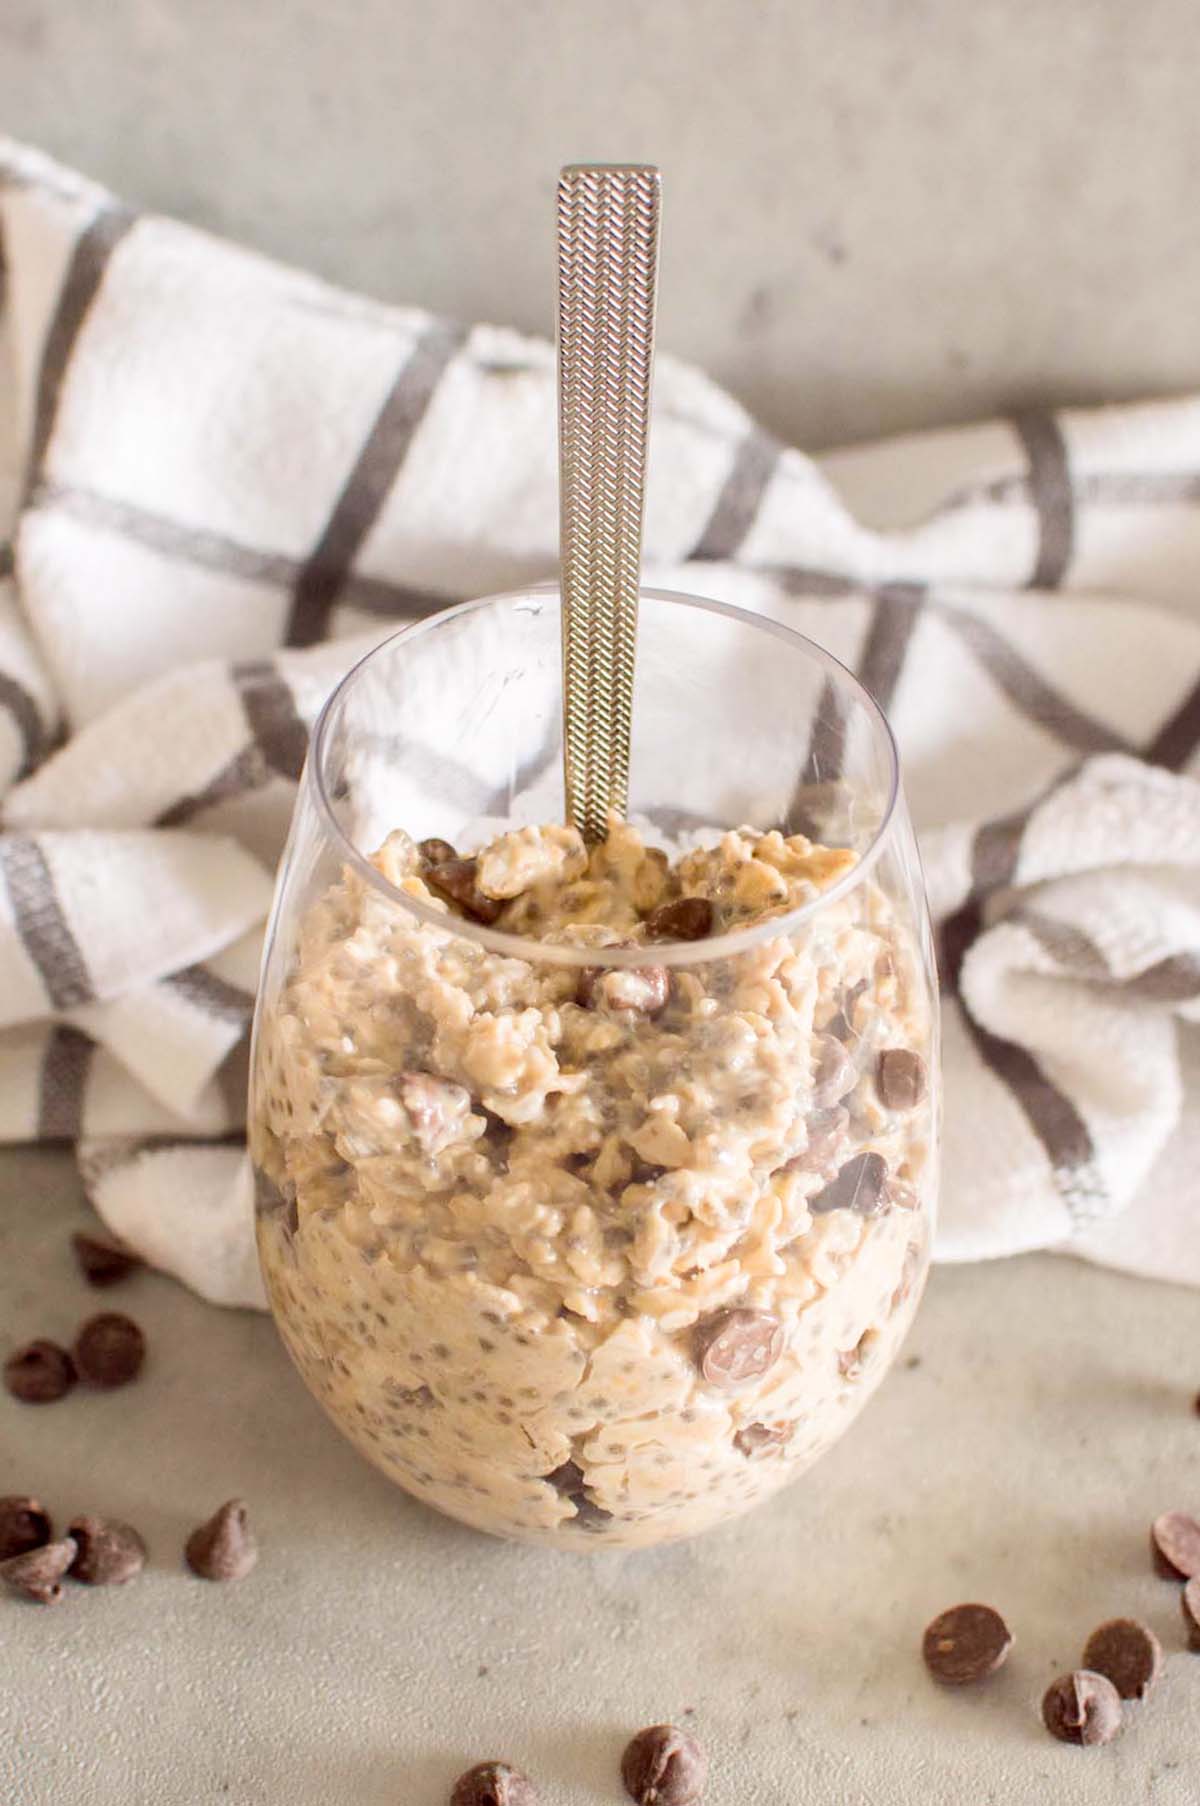 Oats in a glass with a spoon inside.